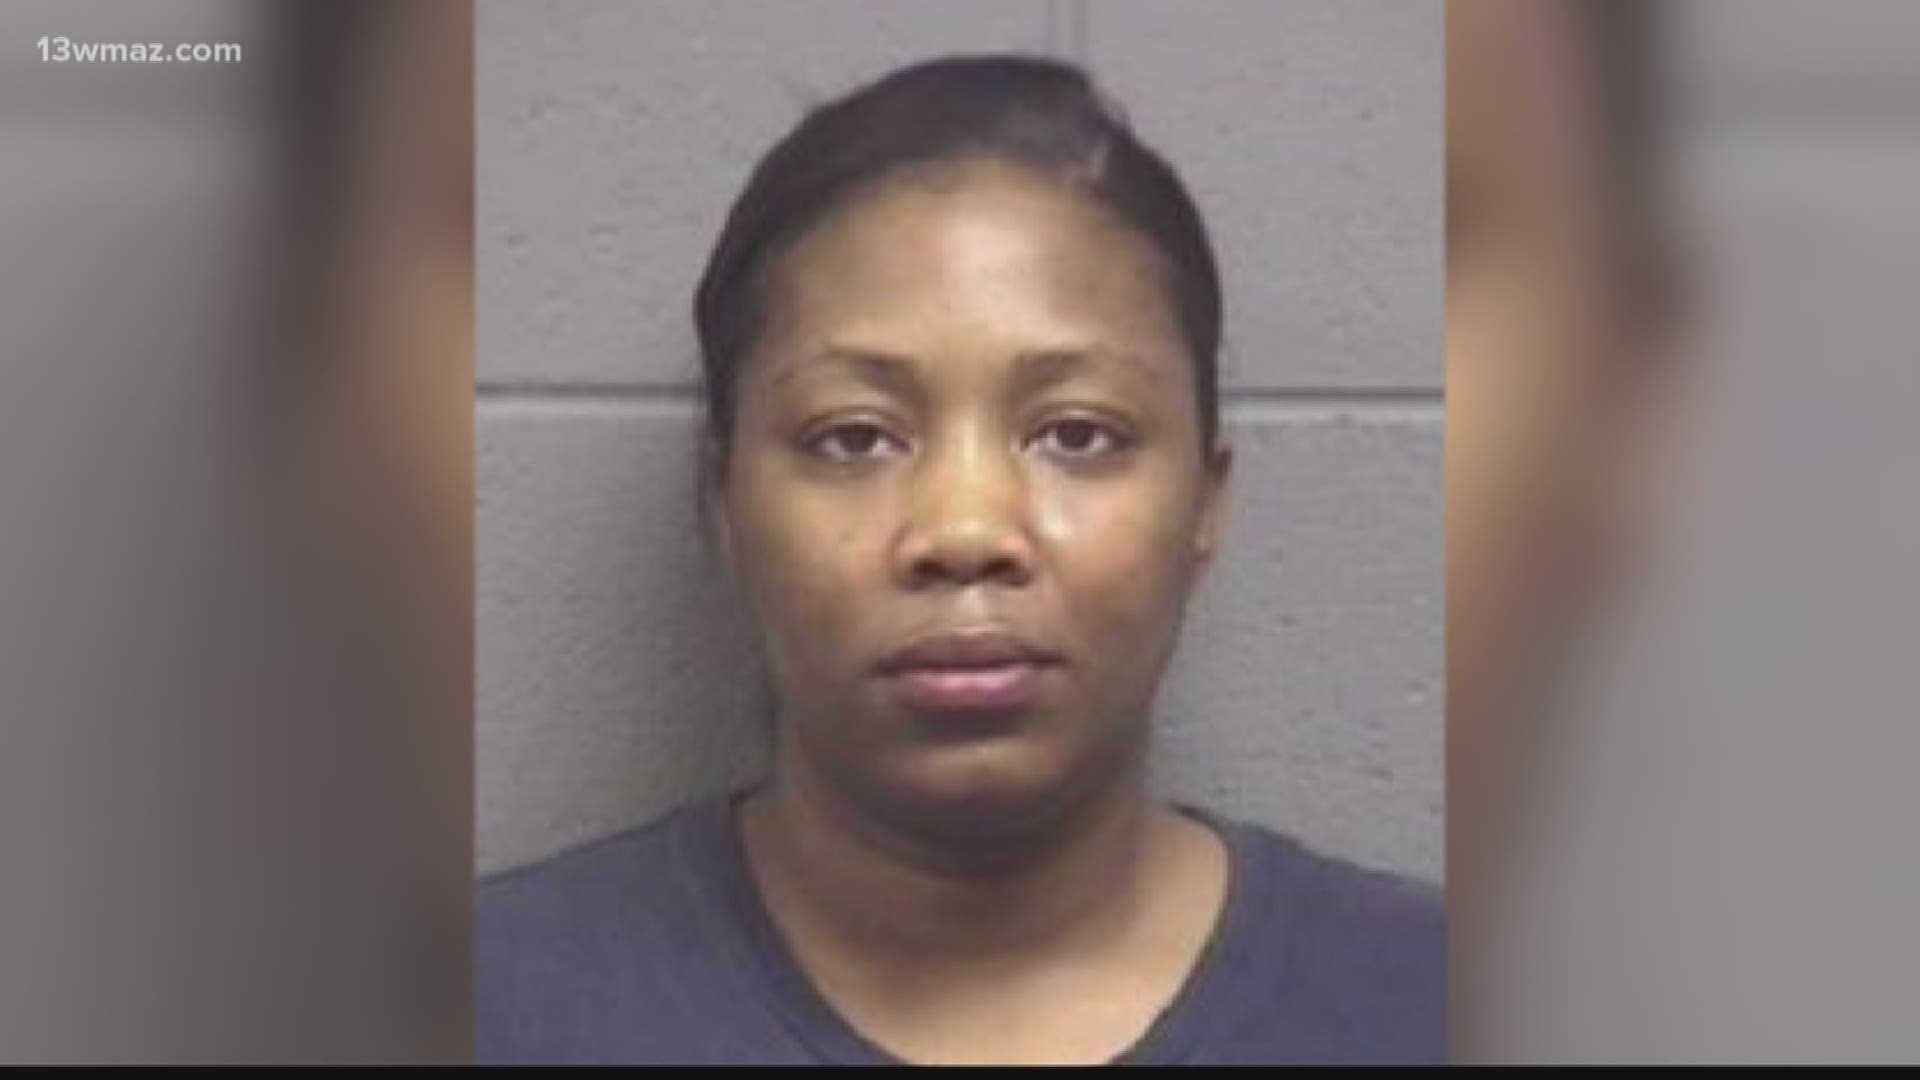 Shalita Harris will serve three years in prison for the accident that killed 6-year-old Arlana Haynes.